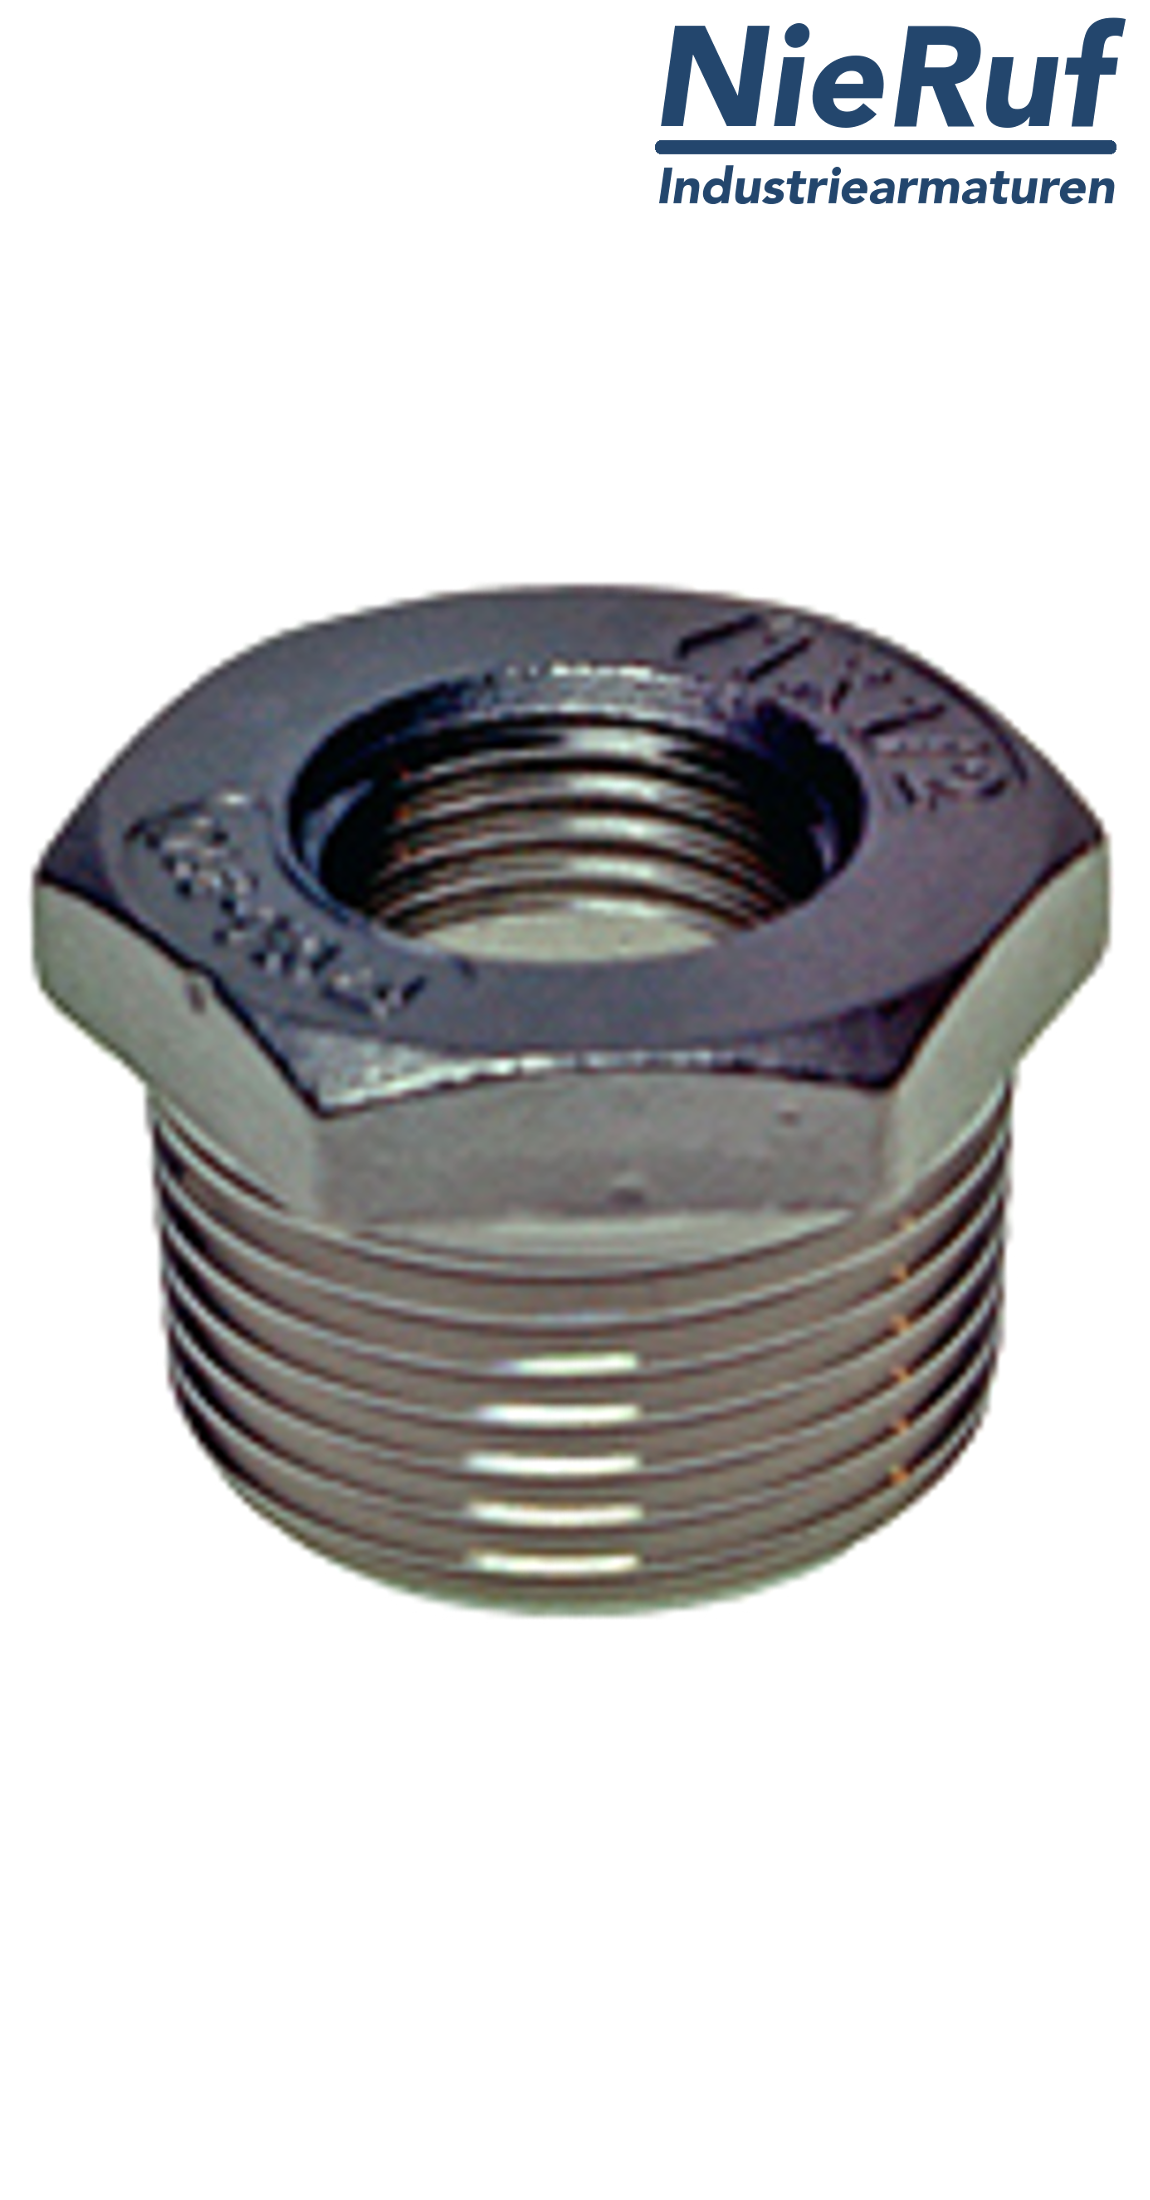 reducing bush 3/8" x 1/4" inch NPT male X female stainless steel 316L